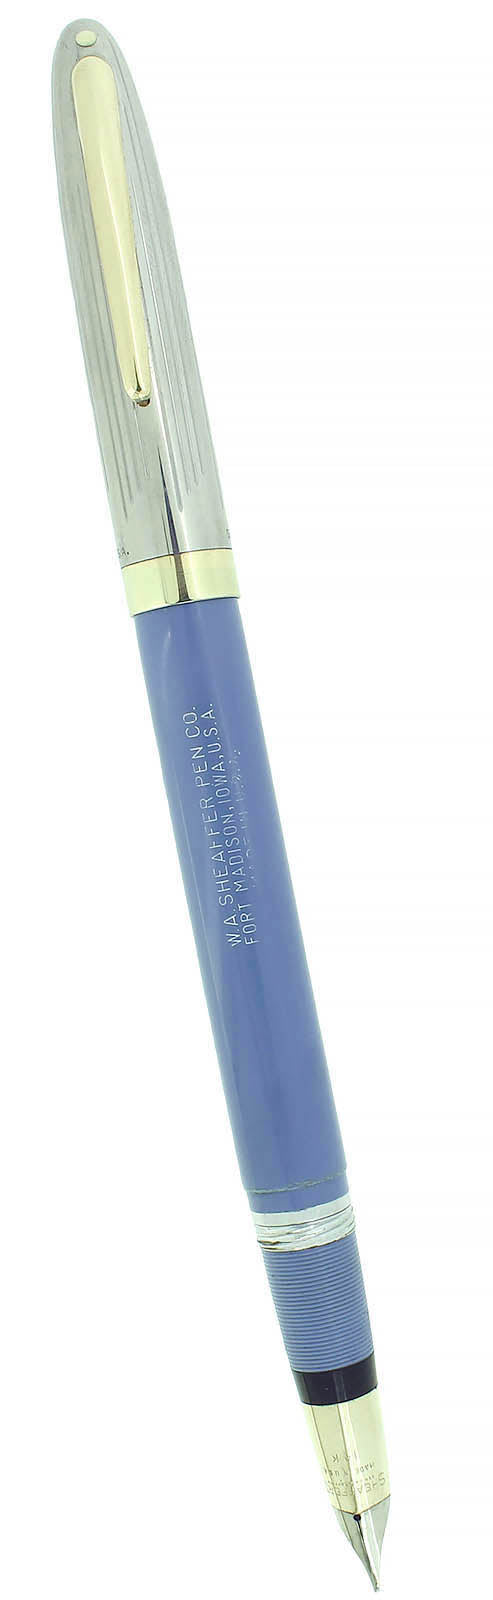 C1959 SHEAFFER SENTINEL PERIWINKLE BLUE SNORKEL FOUNTAIN PEN RESTORED OFFERED BY ANTIQUE DIGGER